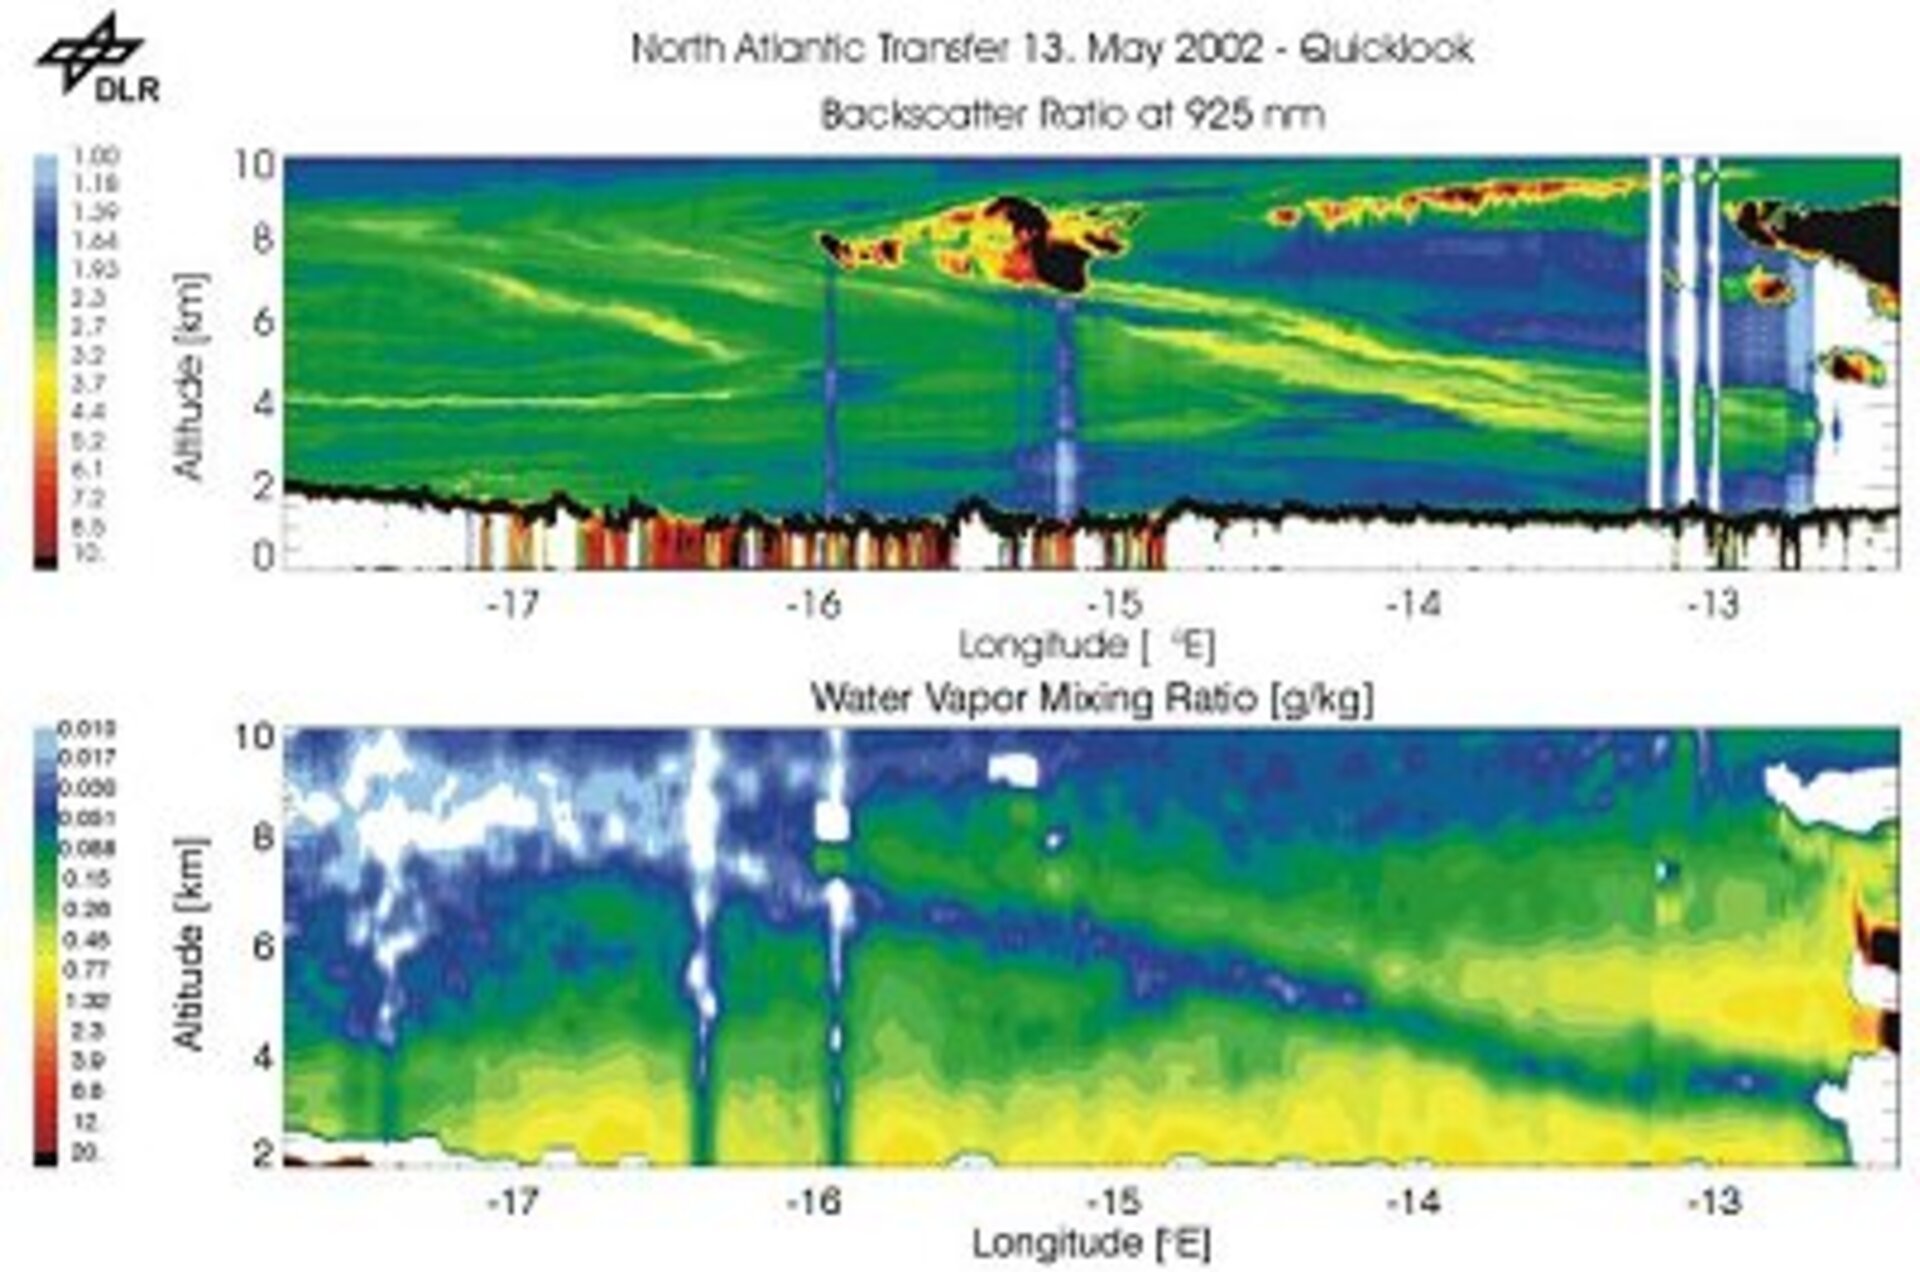 Backscatter ratio at 925 nm(upper panel) and water vapour concentration (lower panel)